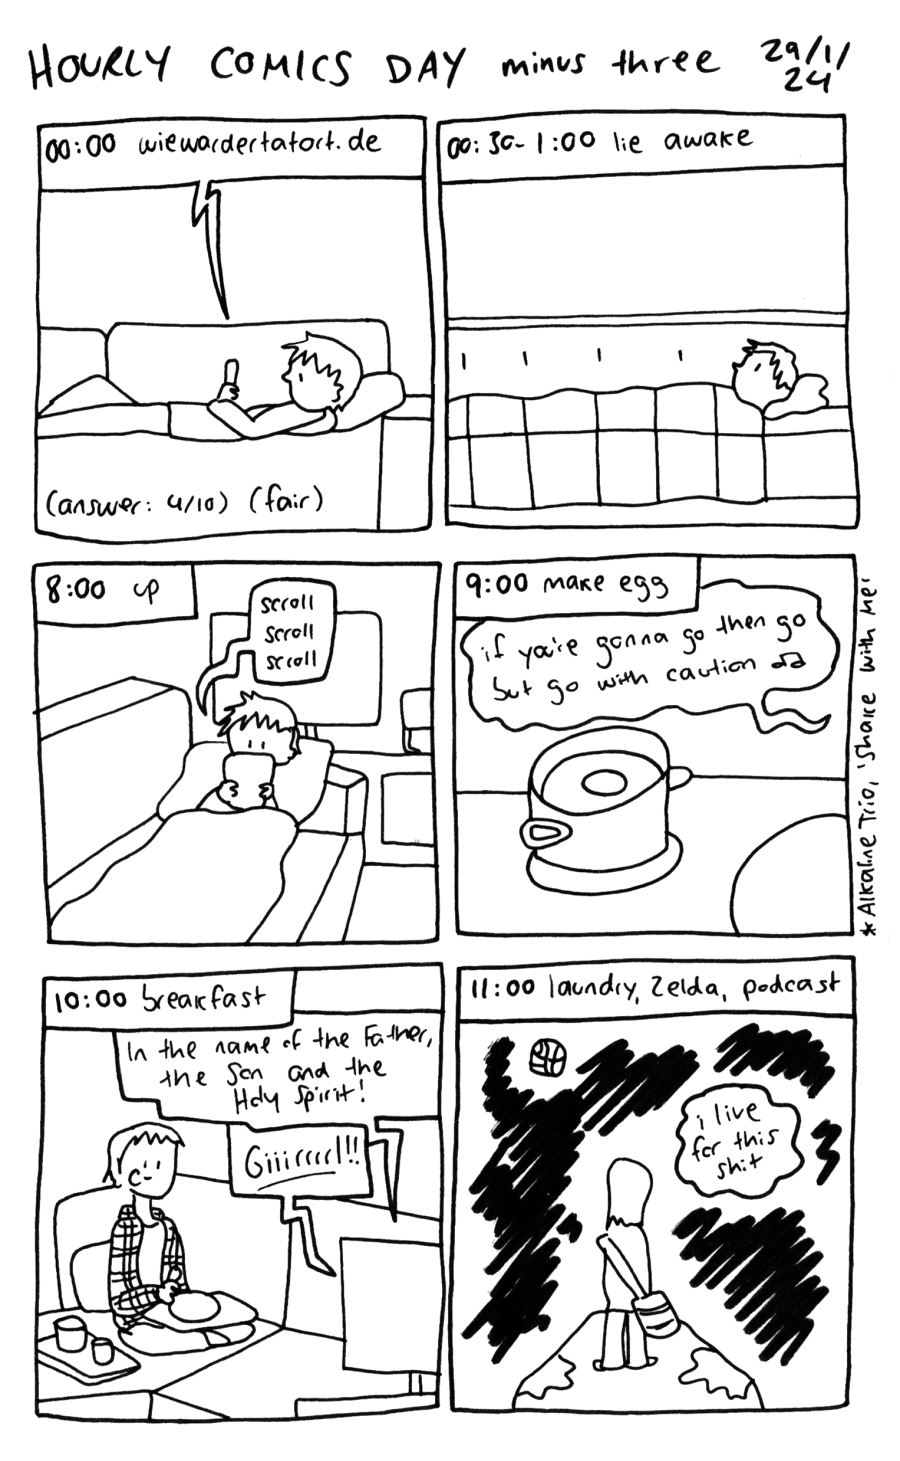 A black-and-white comic. First panel:  00:00, Claire scrolls the website "wiewardertatort.de" (how was the Tatort) on their couch. The answer is 4 out of 10, which is fair 00:30 - 1:00 lie awake 8:00 up and scrolling phone on the couch again 9:00 make egg. A soft-boiled egg cooks on the stove while "if you're gonna go then go but go with caution" plays (lyrics are from Alkaline Trio's "Shake With Me" 10:00 breakfast - Claire, in a plaid shirt, eats from a tray on the couch with two glasses on another tray beside them. Dialogue comes from the big-screen television: "In the name of the Father, the Son and the Holy Spirit!" "Giiirrrrl!" 11:00 laundry, Zelda, podcast - Link stands on a large tree root in the dark, with a barrel fused to a stick hanging off his shoulder. Something like a lantern shining off in the distance.  A caption says "I live for this shit"